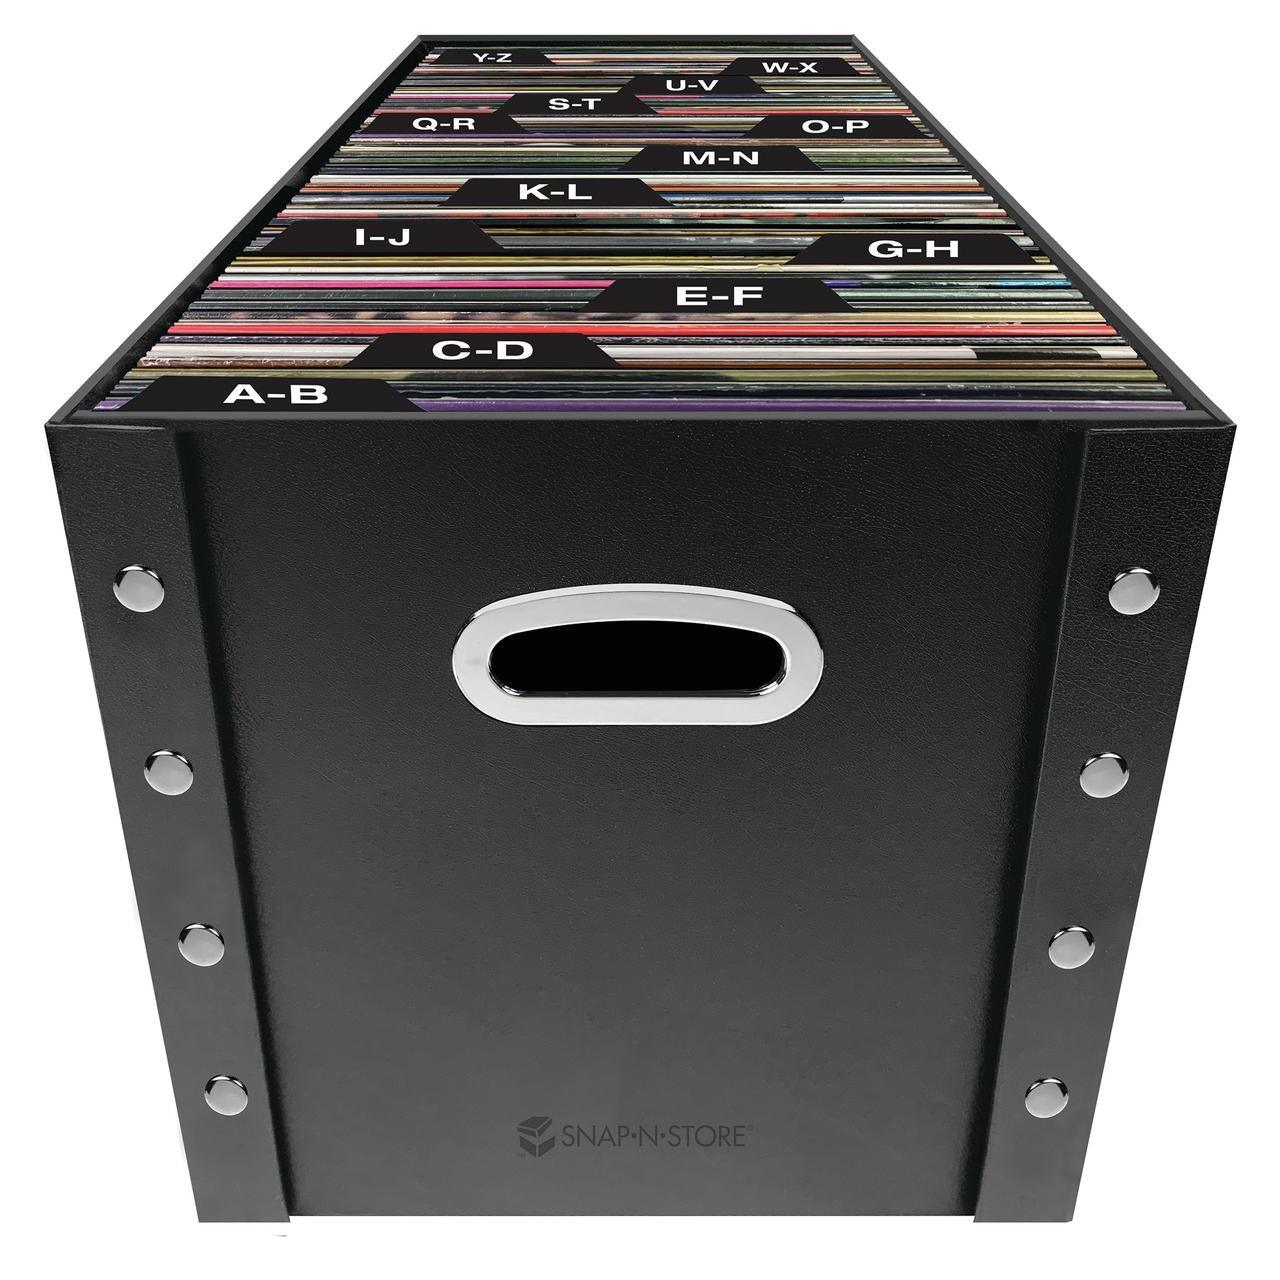 Snap-N-Store Vinyl Records Storage Box with 13 Count Record Guides, Audio Turntable Vinyl Record Storage, New GONZALABES